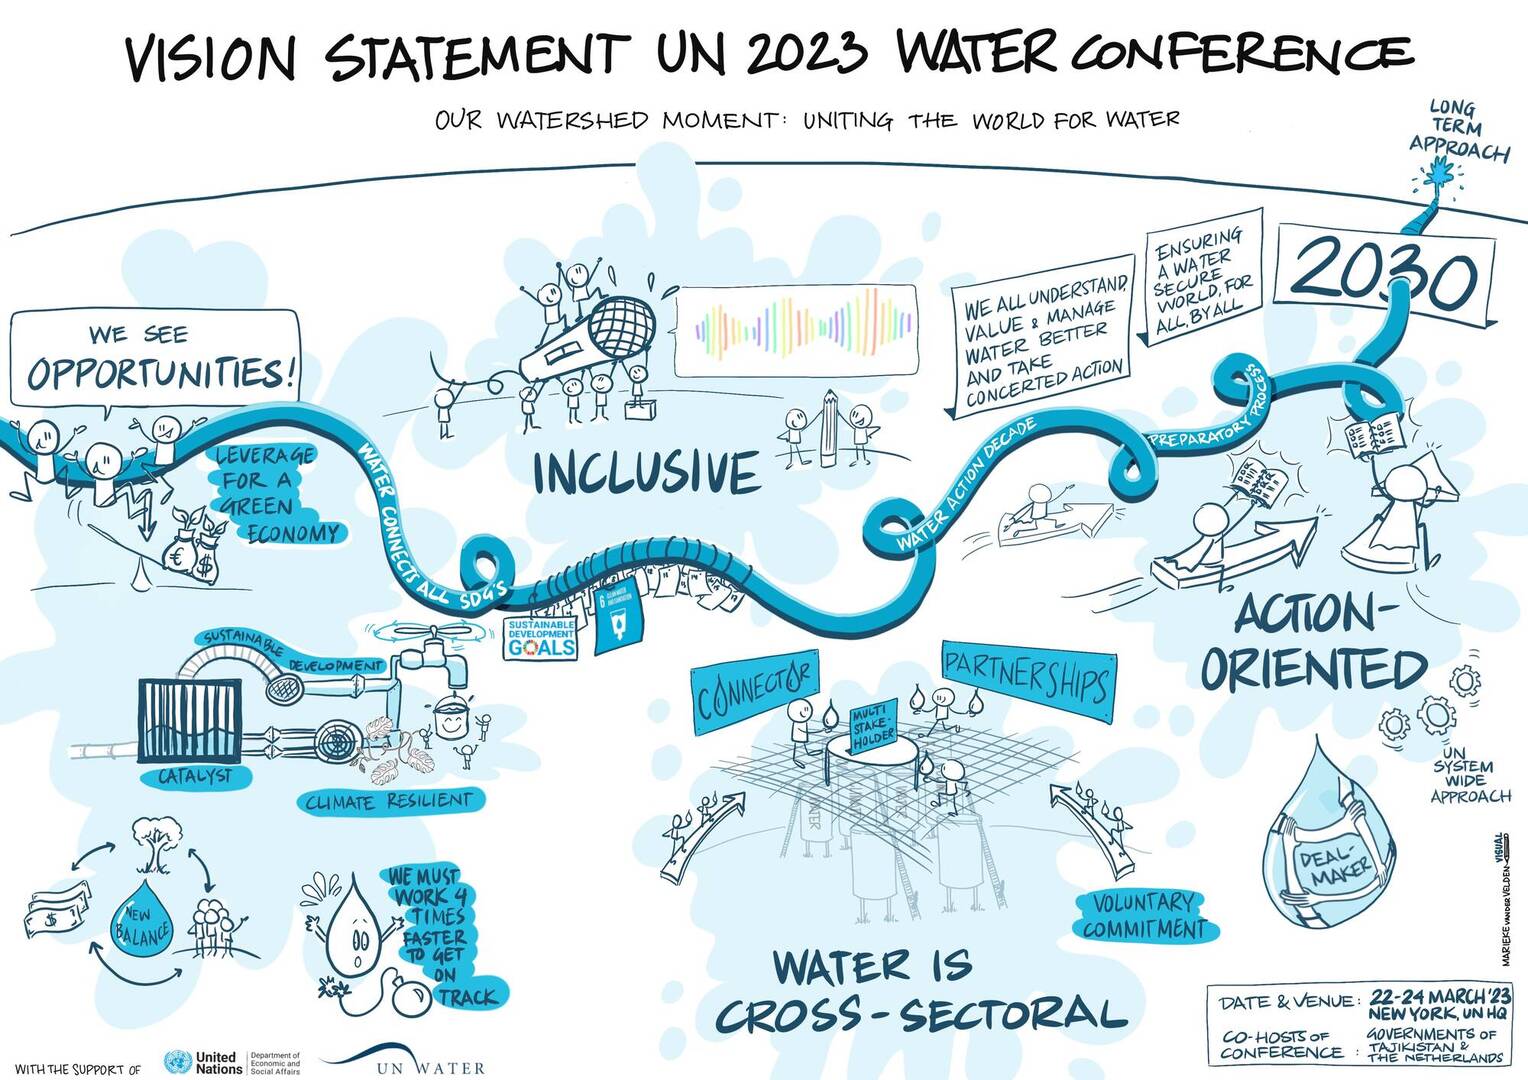 vision-statement-waterconference-2023